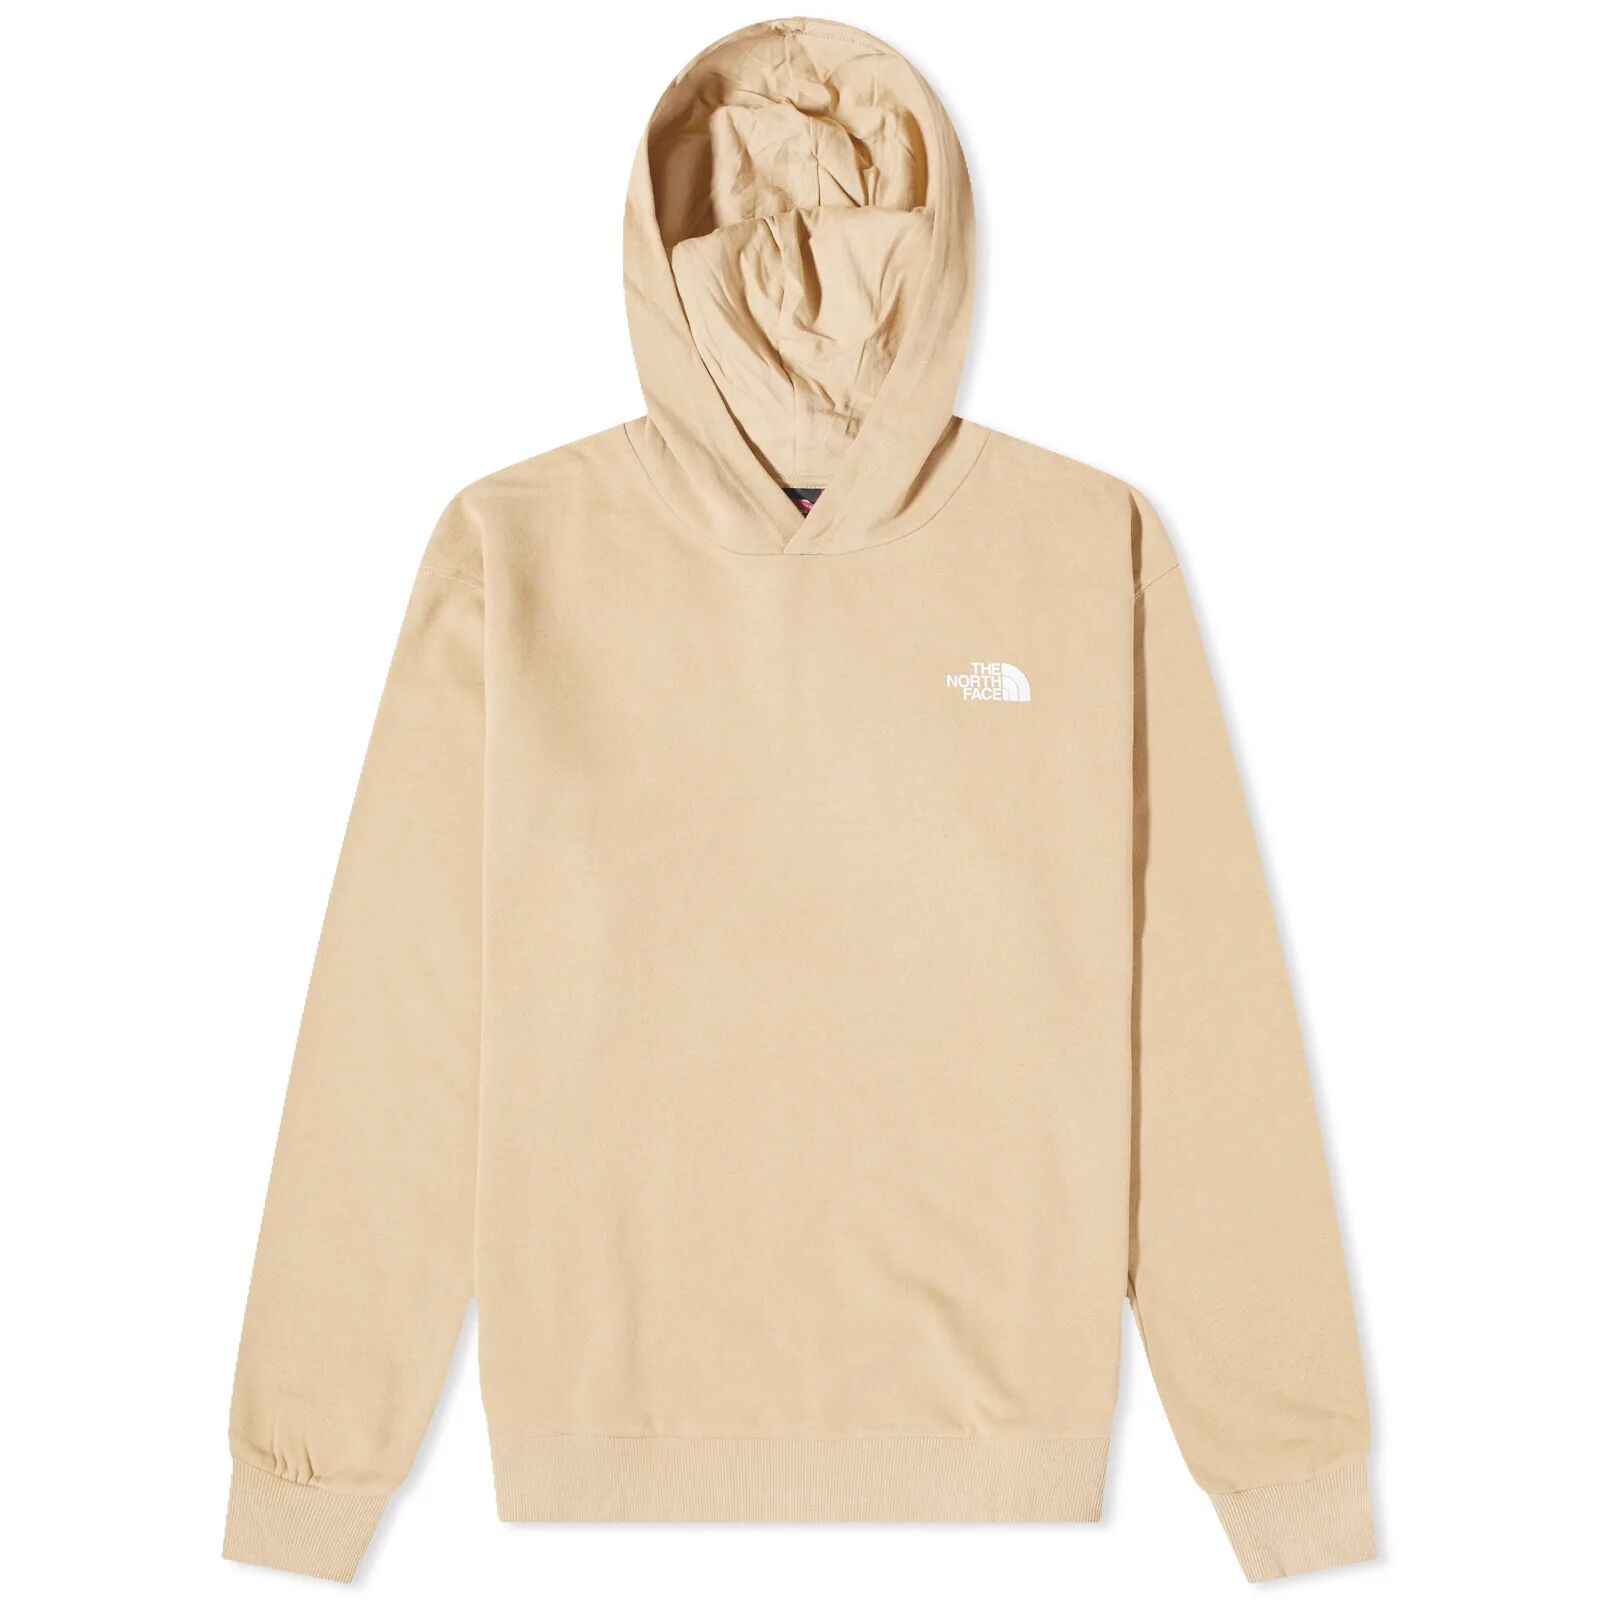 The North Face Men's Matterhorn Hoodie in Khaki Stone, Size X-Large